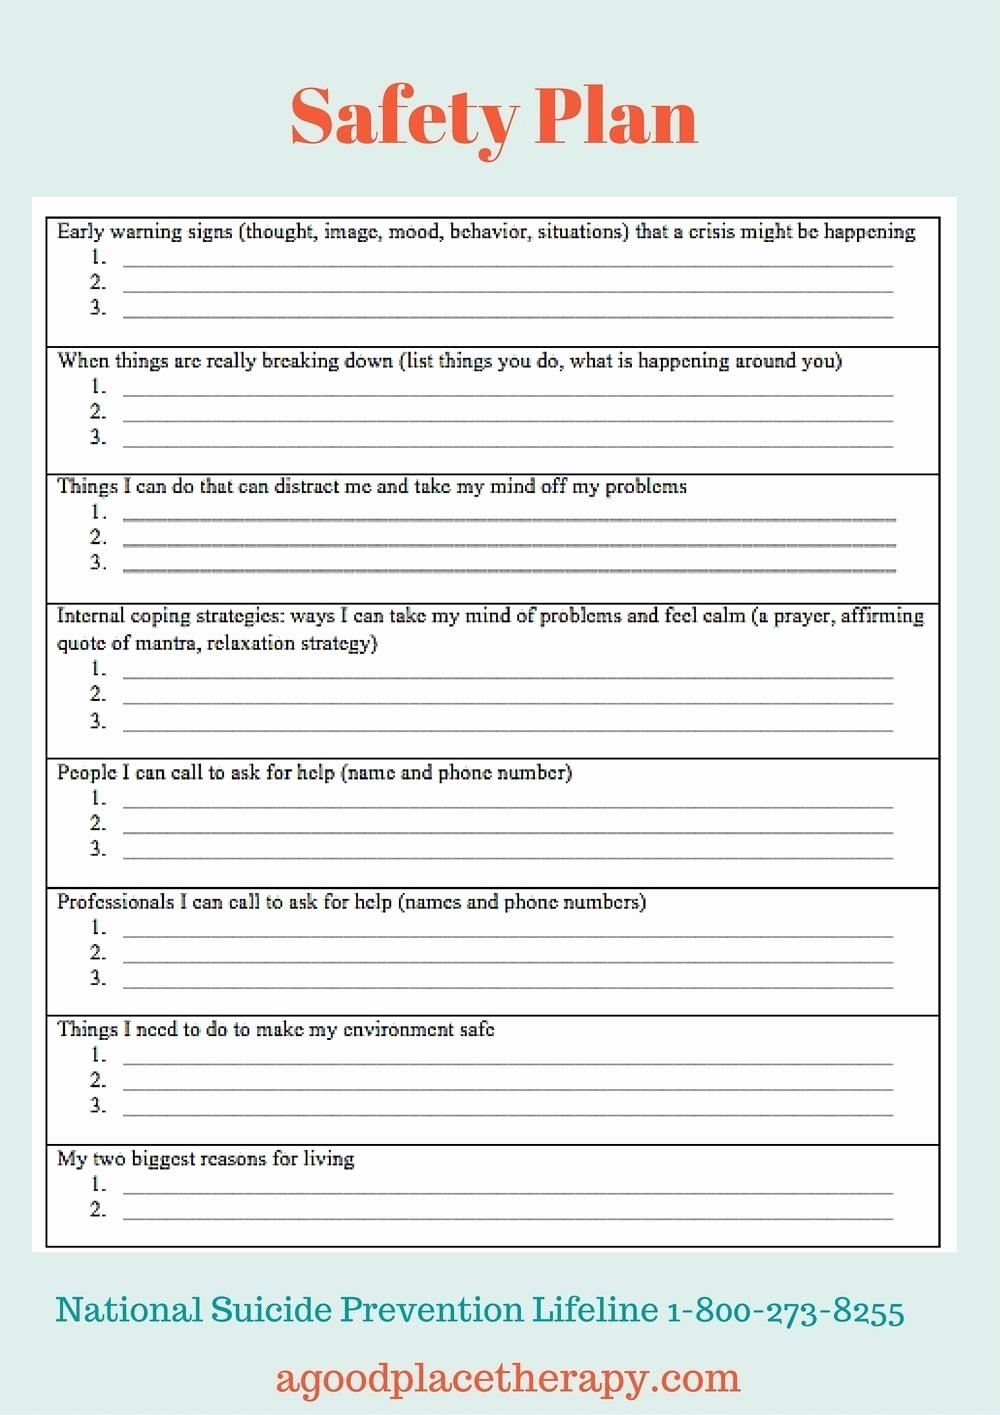 Health and Safety Plan Template New Mental Health Safety Plan Template